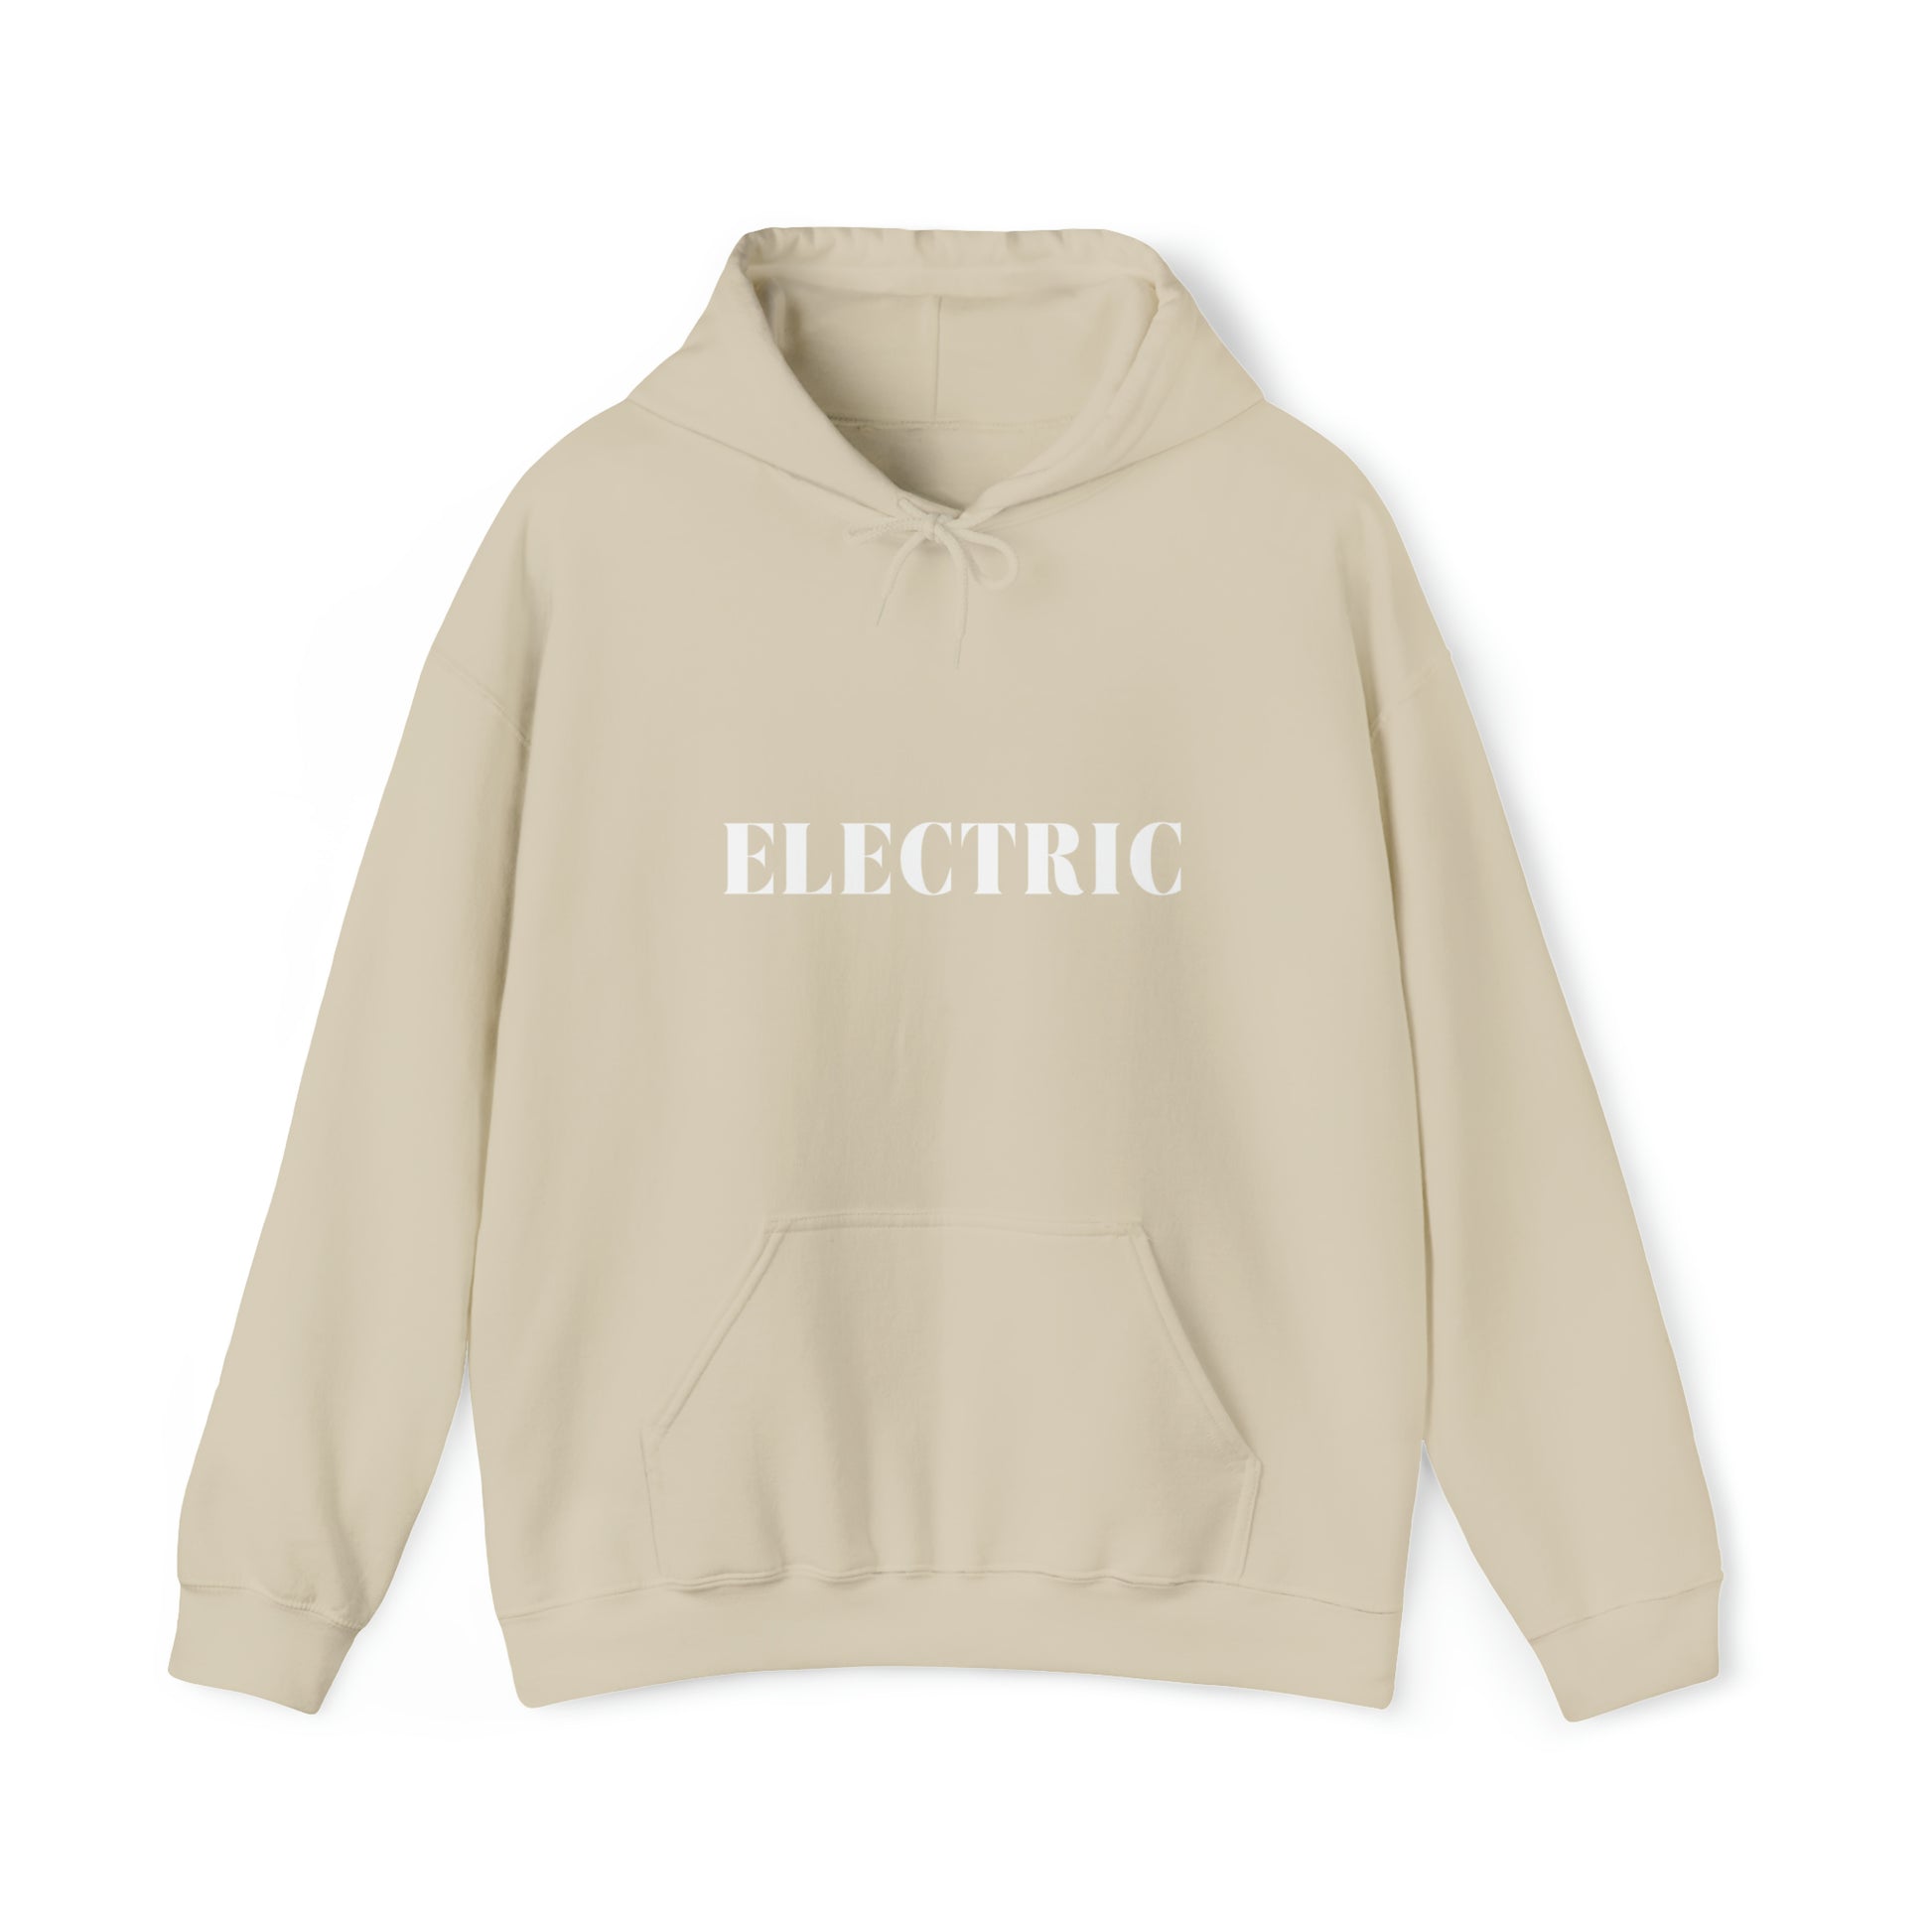 S Sand Electric Hoodie from HoodySZN.com